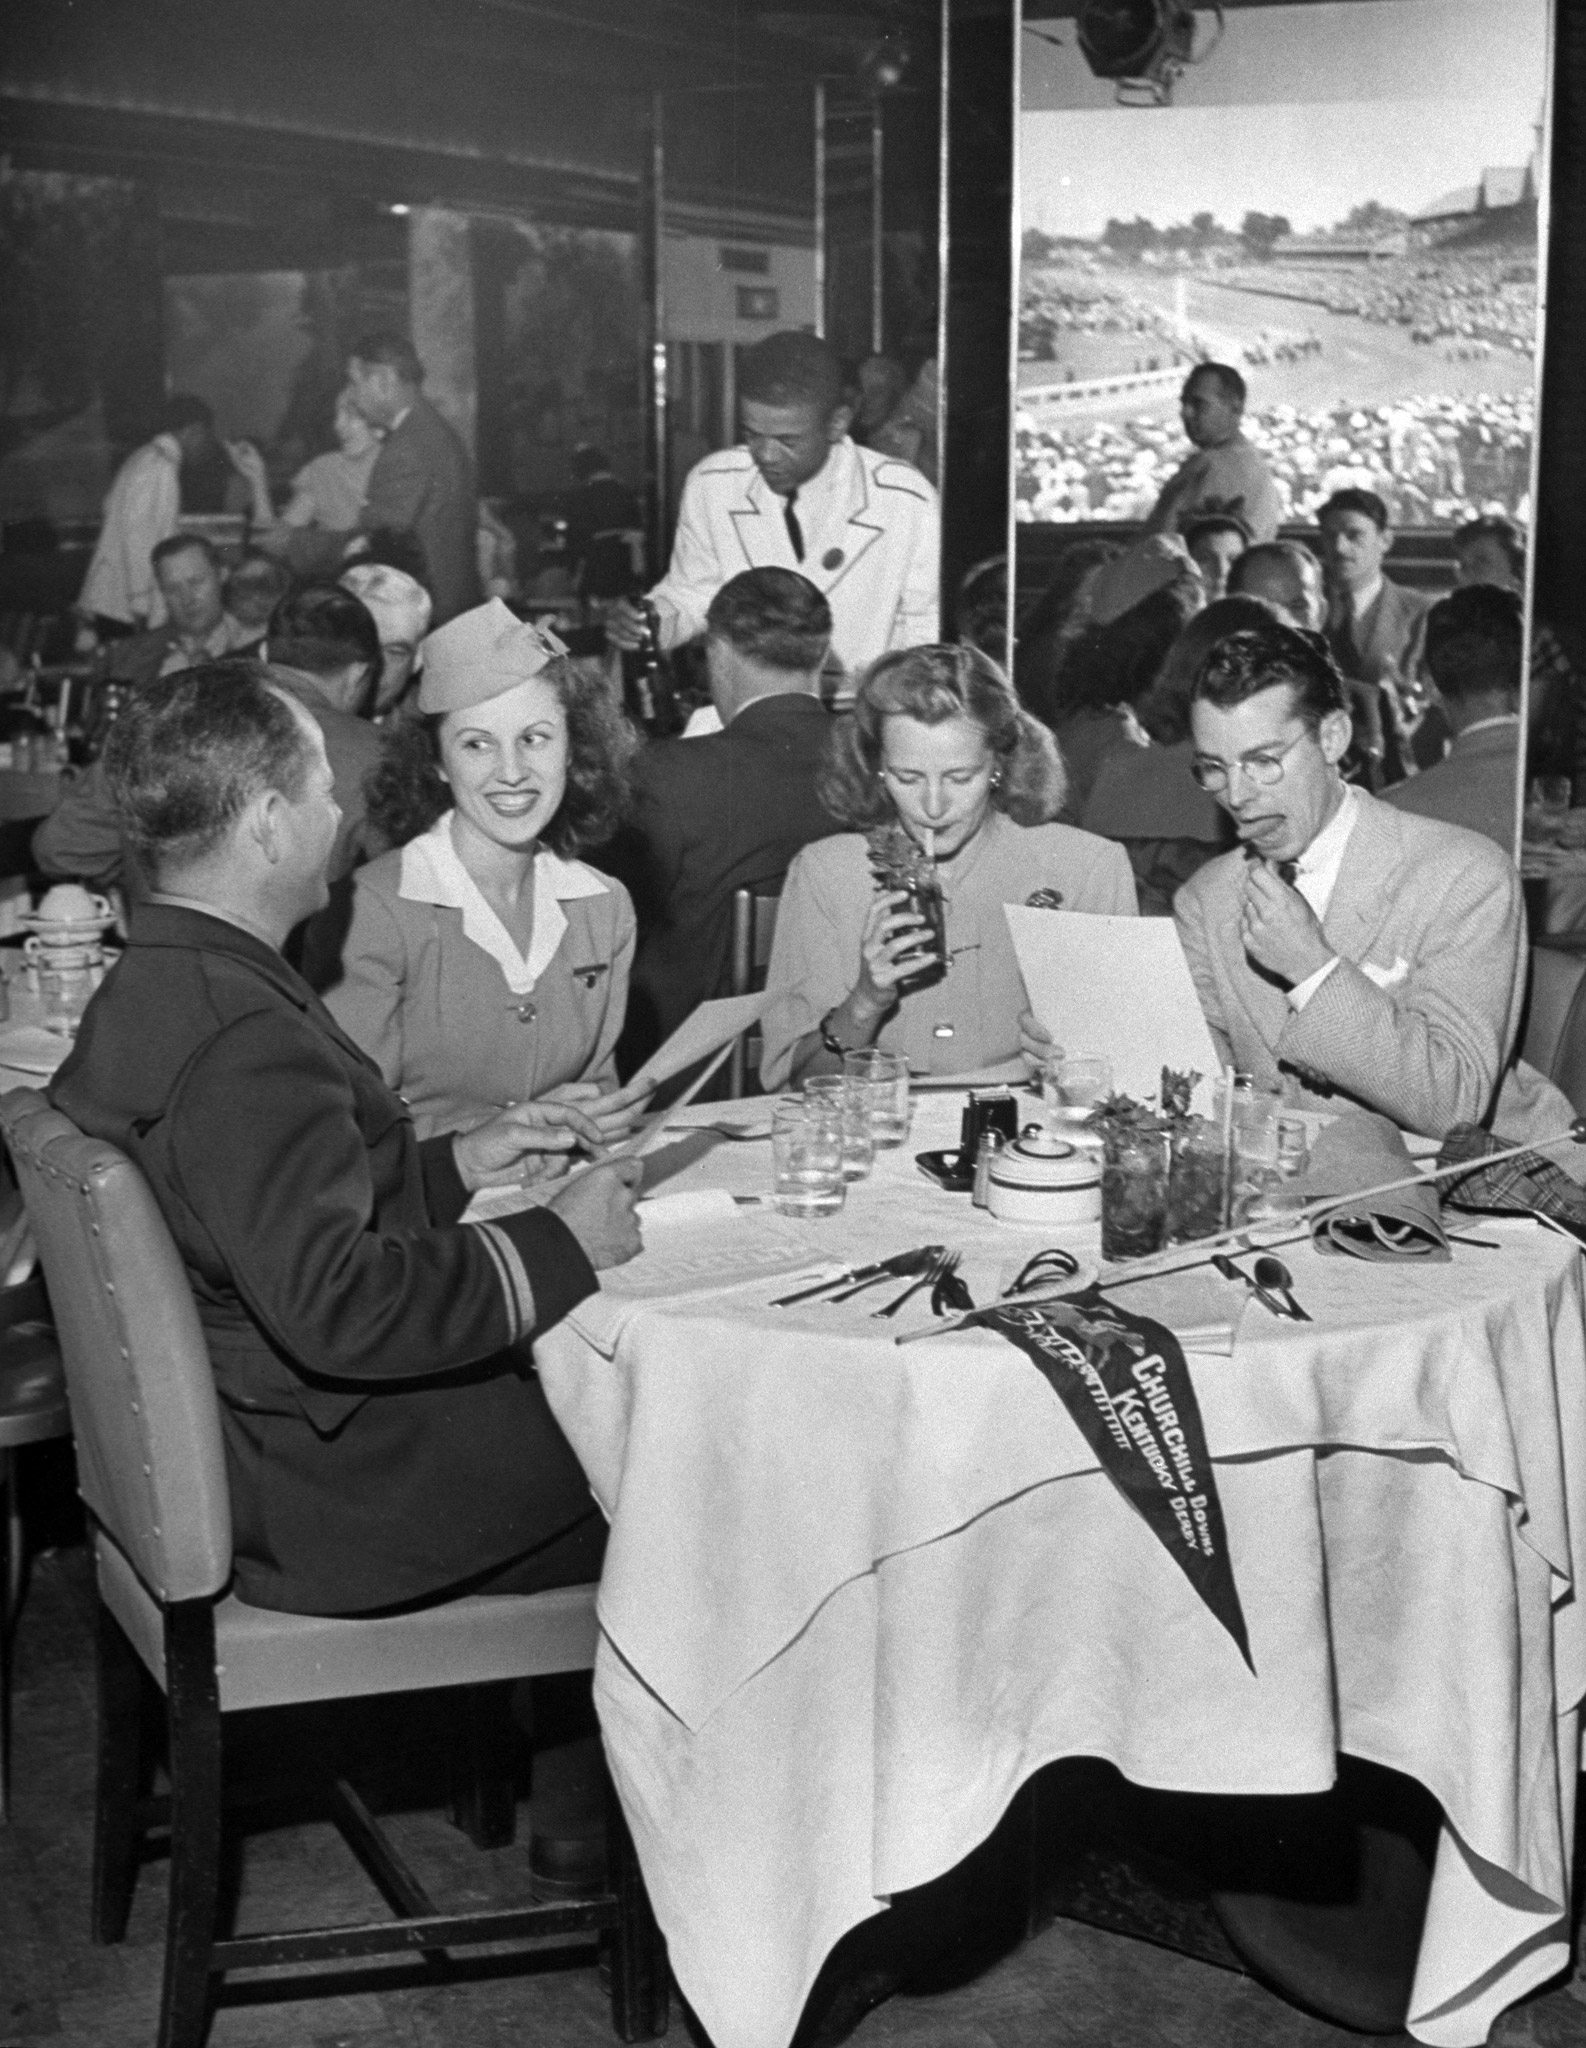 Fans eating in restaurant at the Kentucky Derby, 1946.